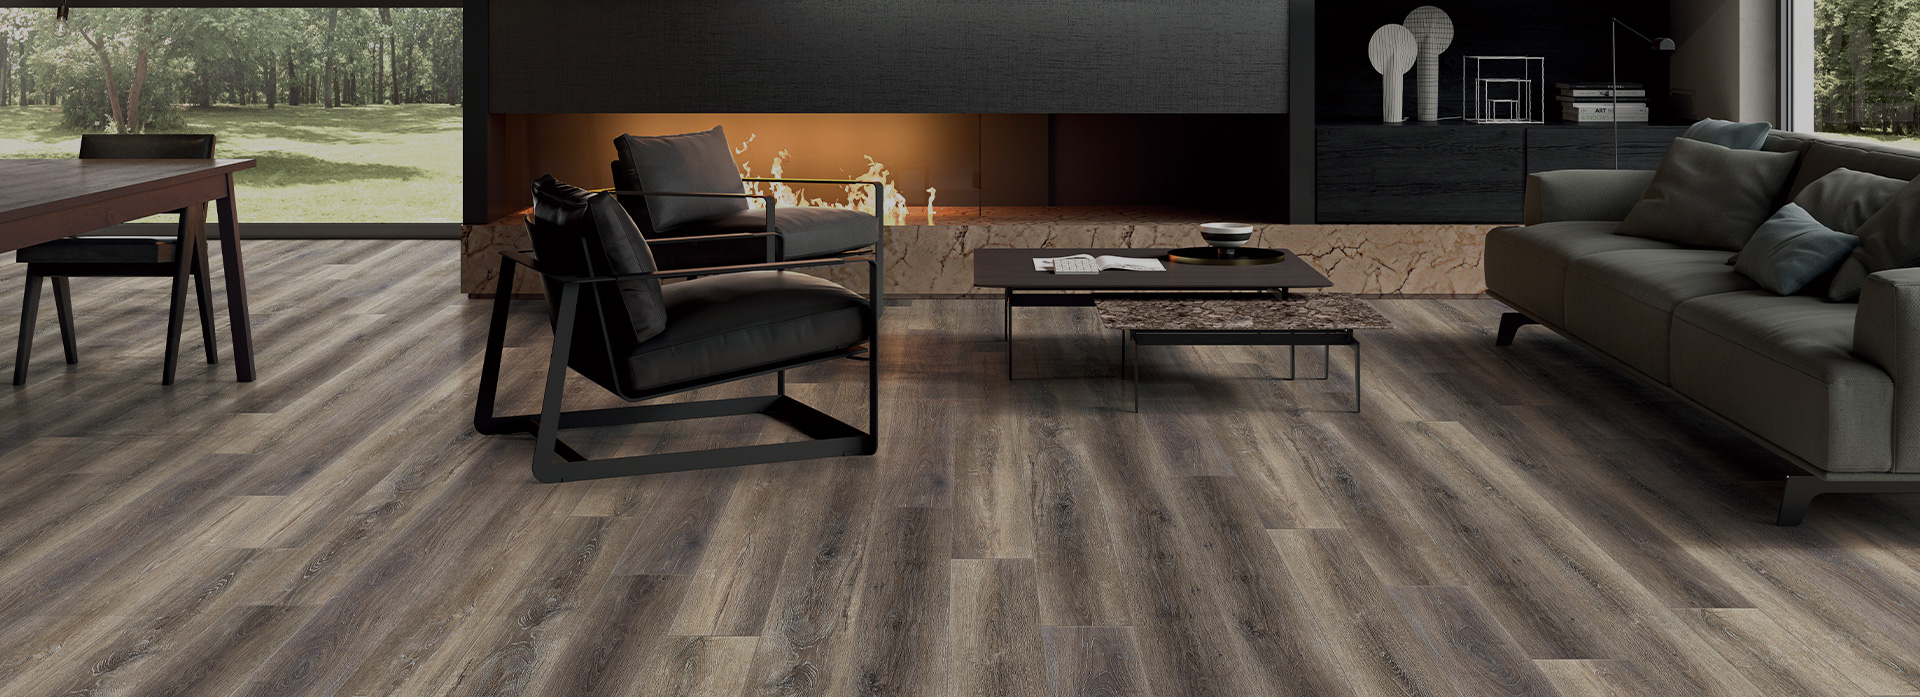 SPC Flooring-Brings fashionable and healthy life of global quality